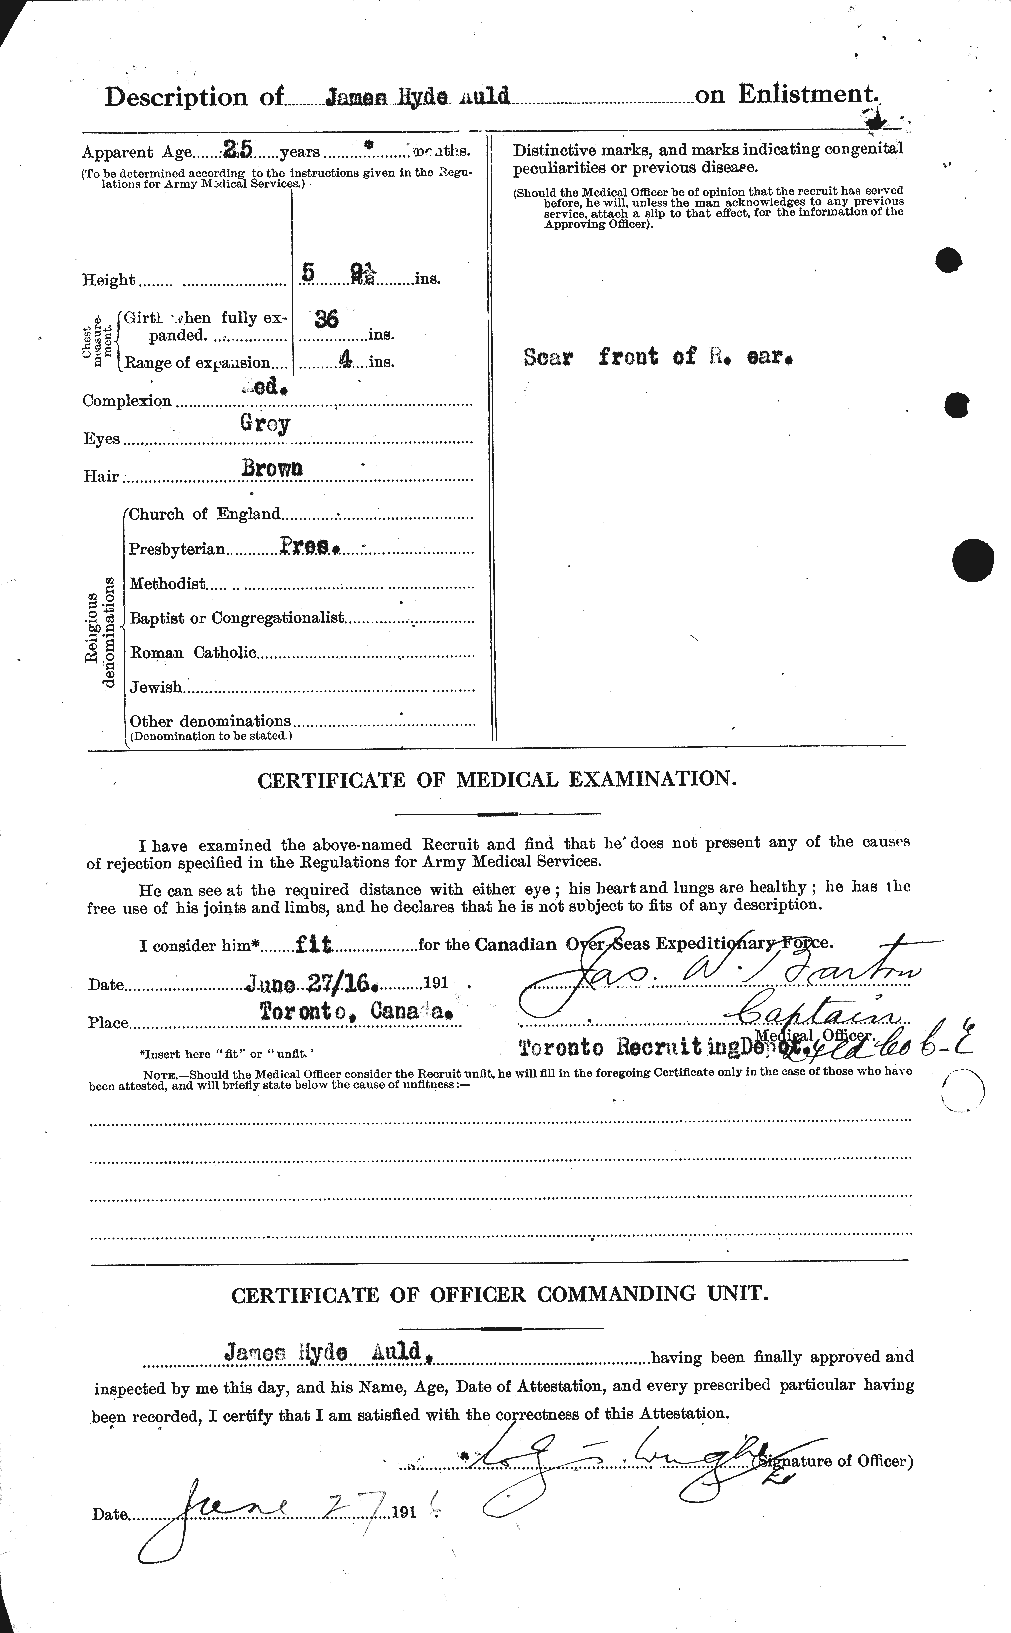 Personnel Records of the First World War - CEF 224267b